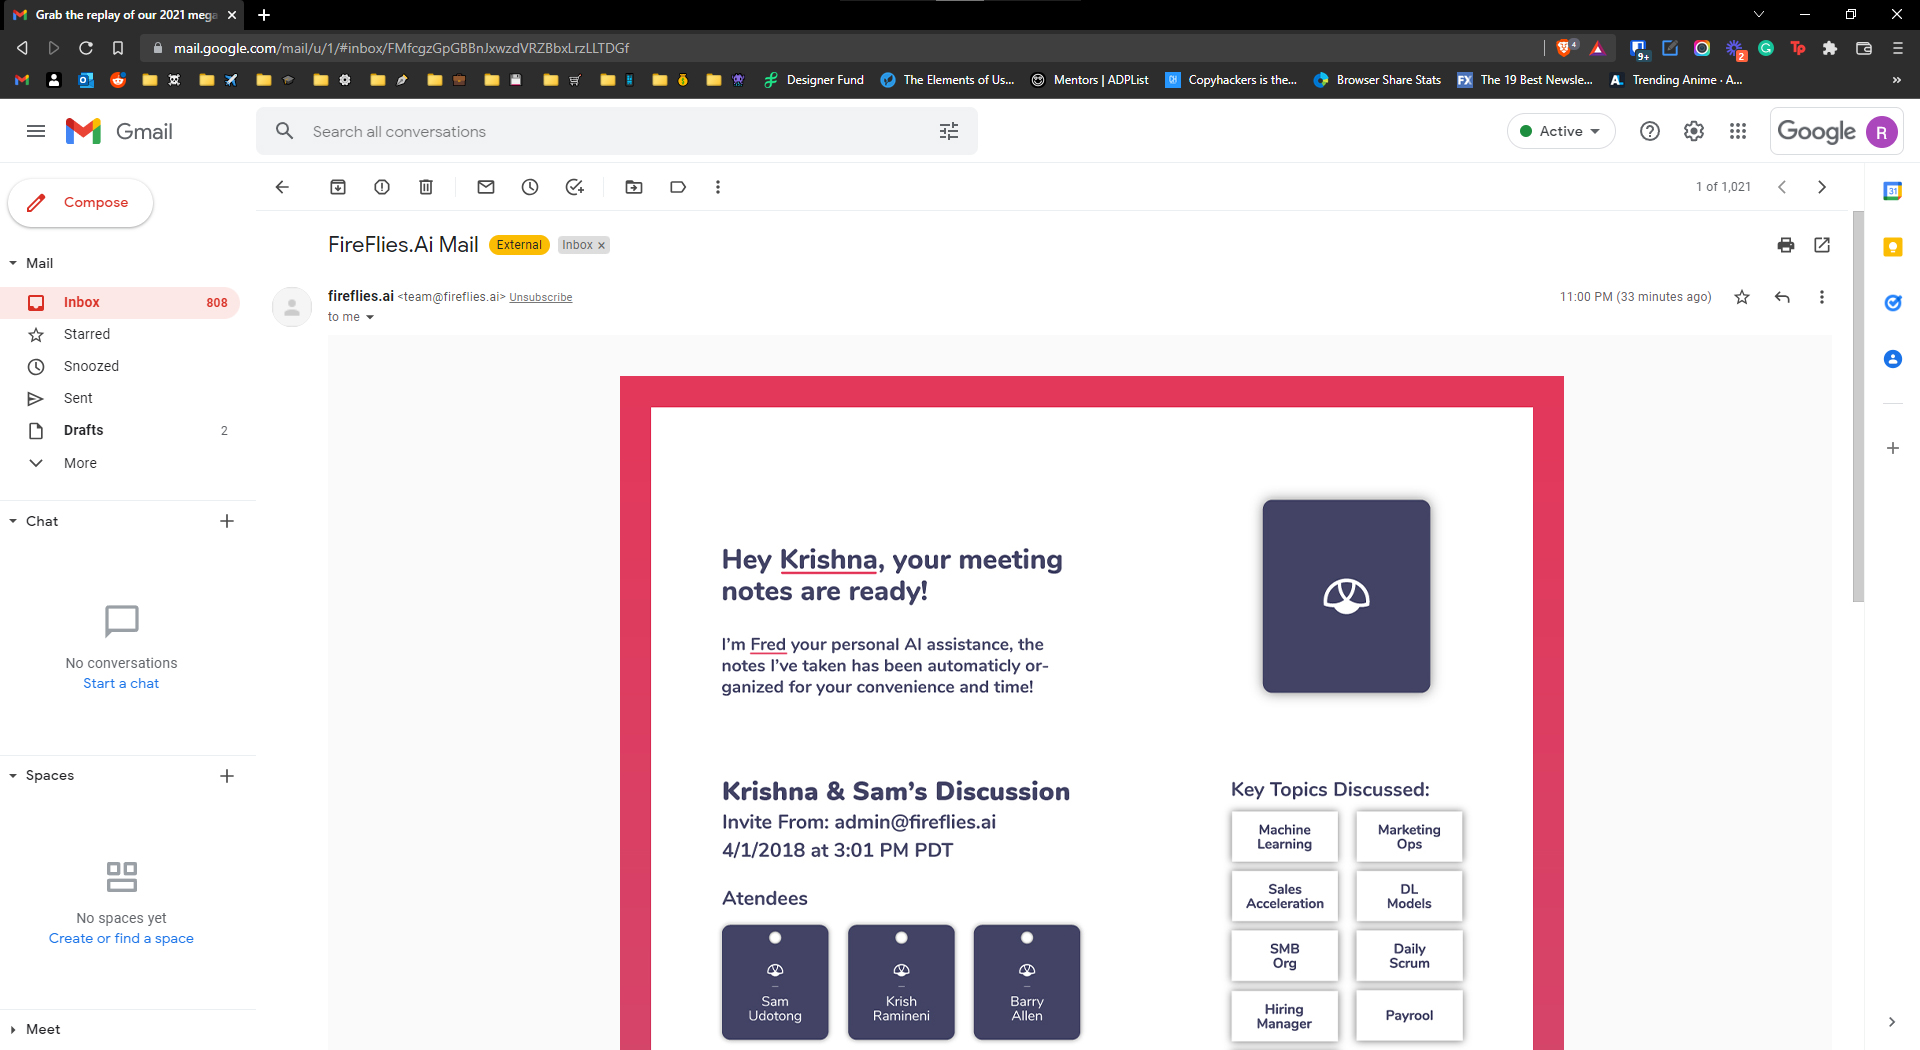 Web view of the email template designed for Fireflies.ai, ensuring a responsive and user-friendly experience.